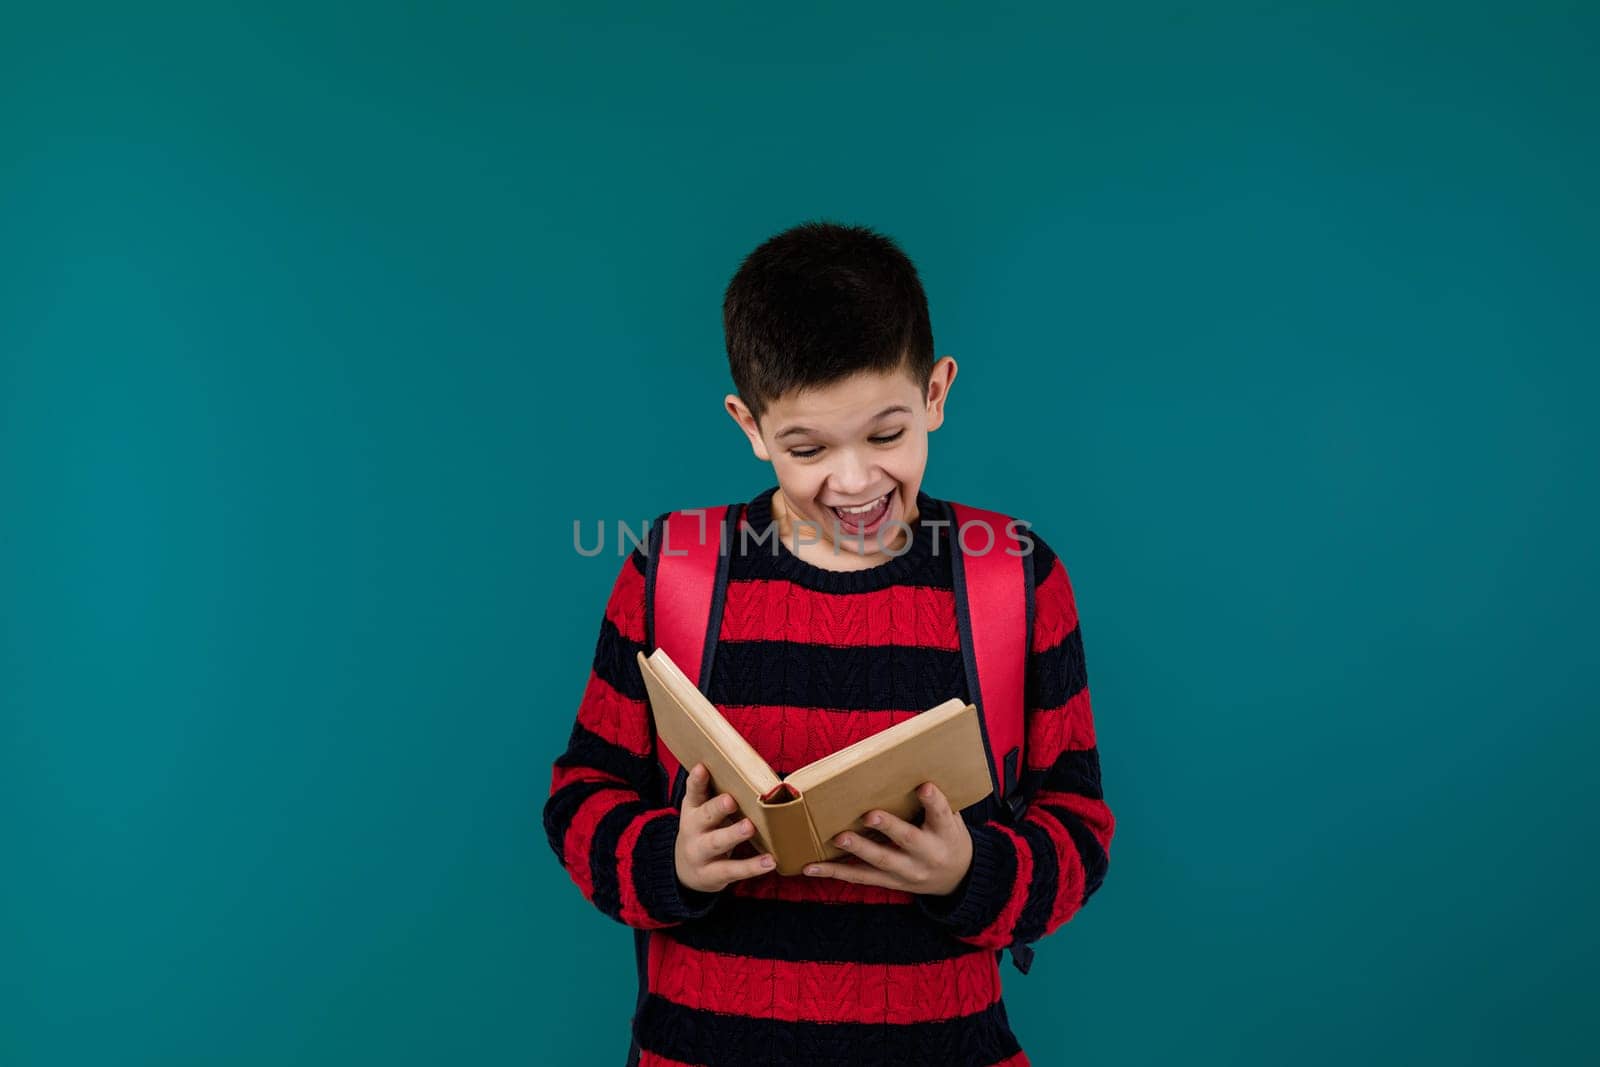 smiling little cheerful school boy reading interesting book over blue background, copy space. School concept.